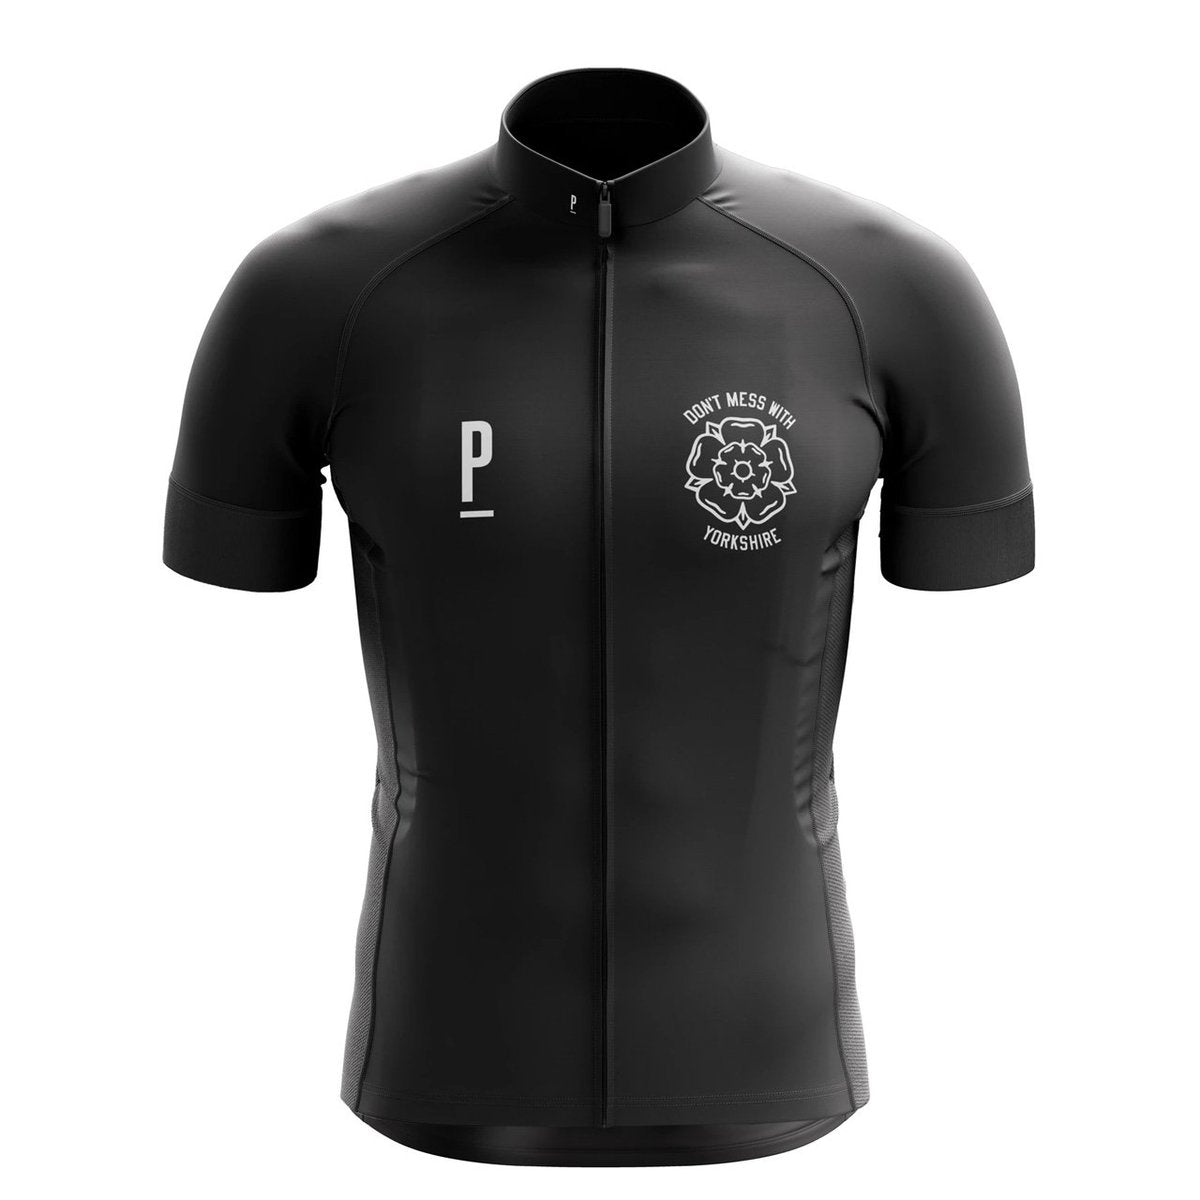 yorkshire cycling top